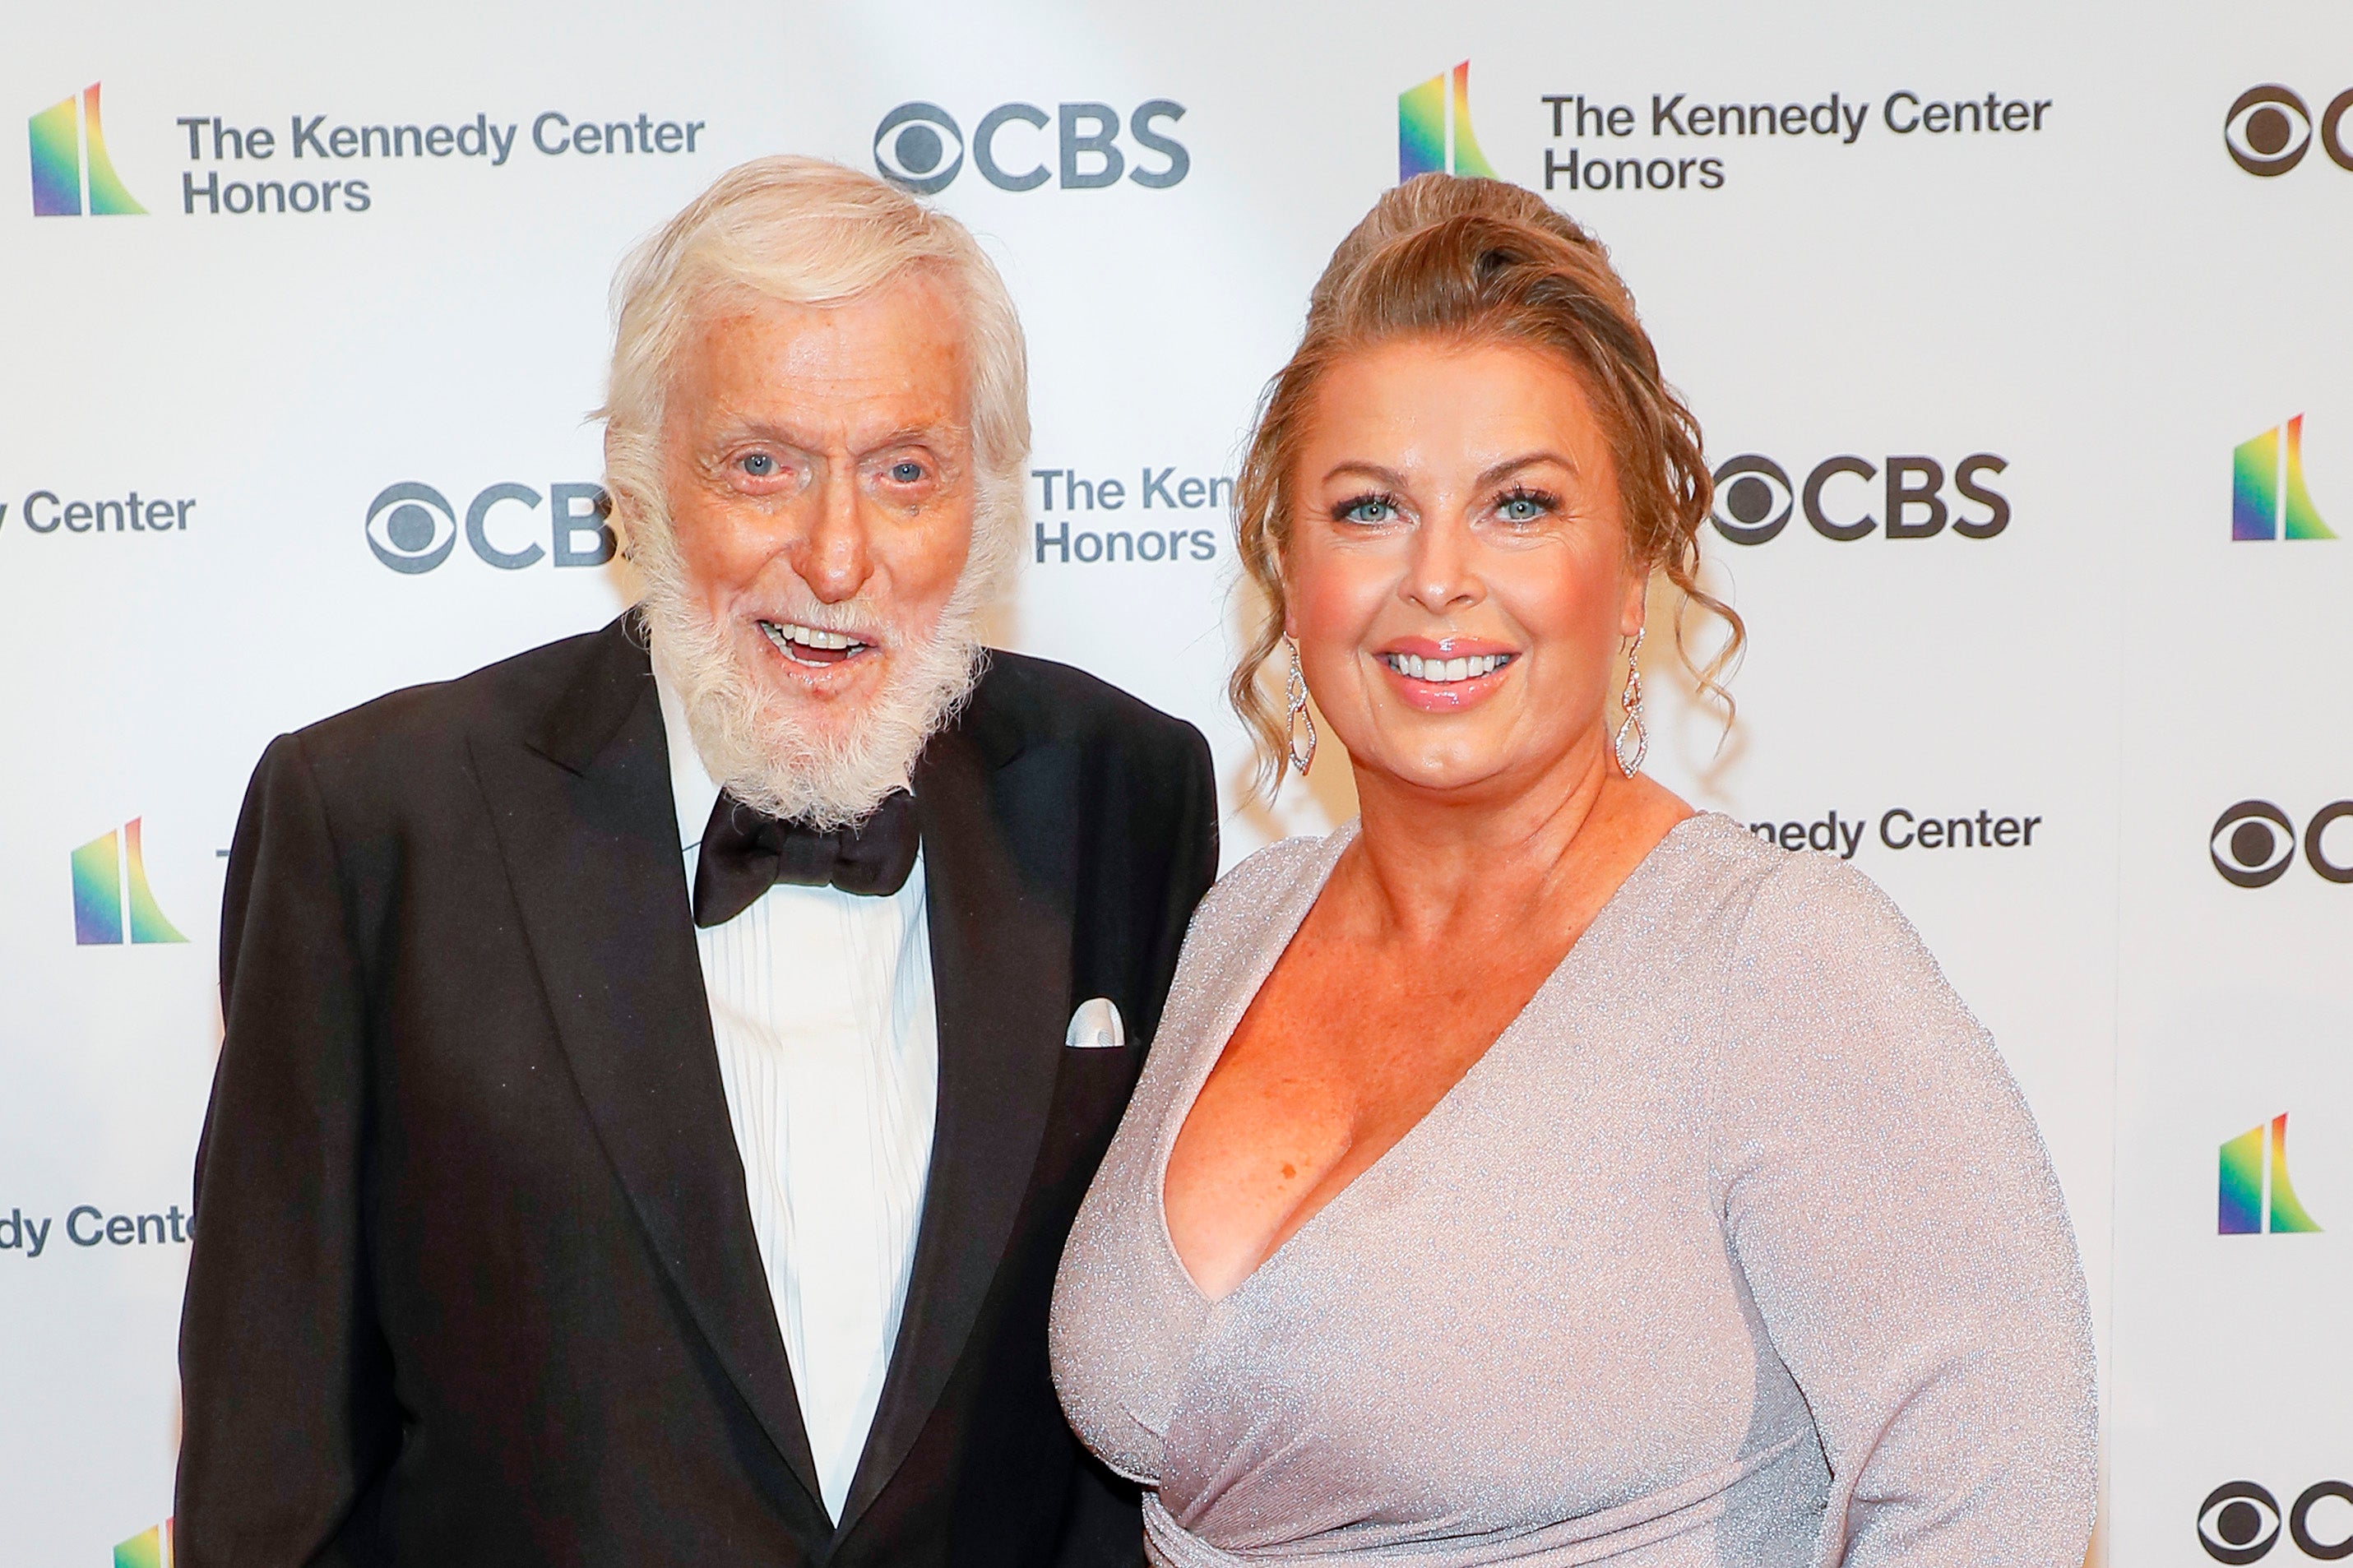 Dick Van Dyke and Arlene Silver attend the 43rd Annual Kennedy Center Honors at The Kennedy Center on May 21, 2021